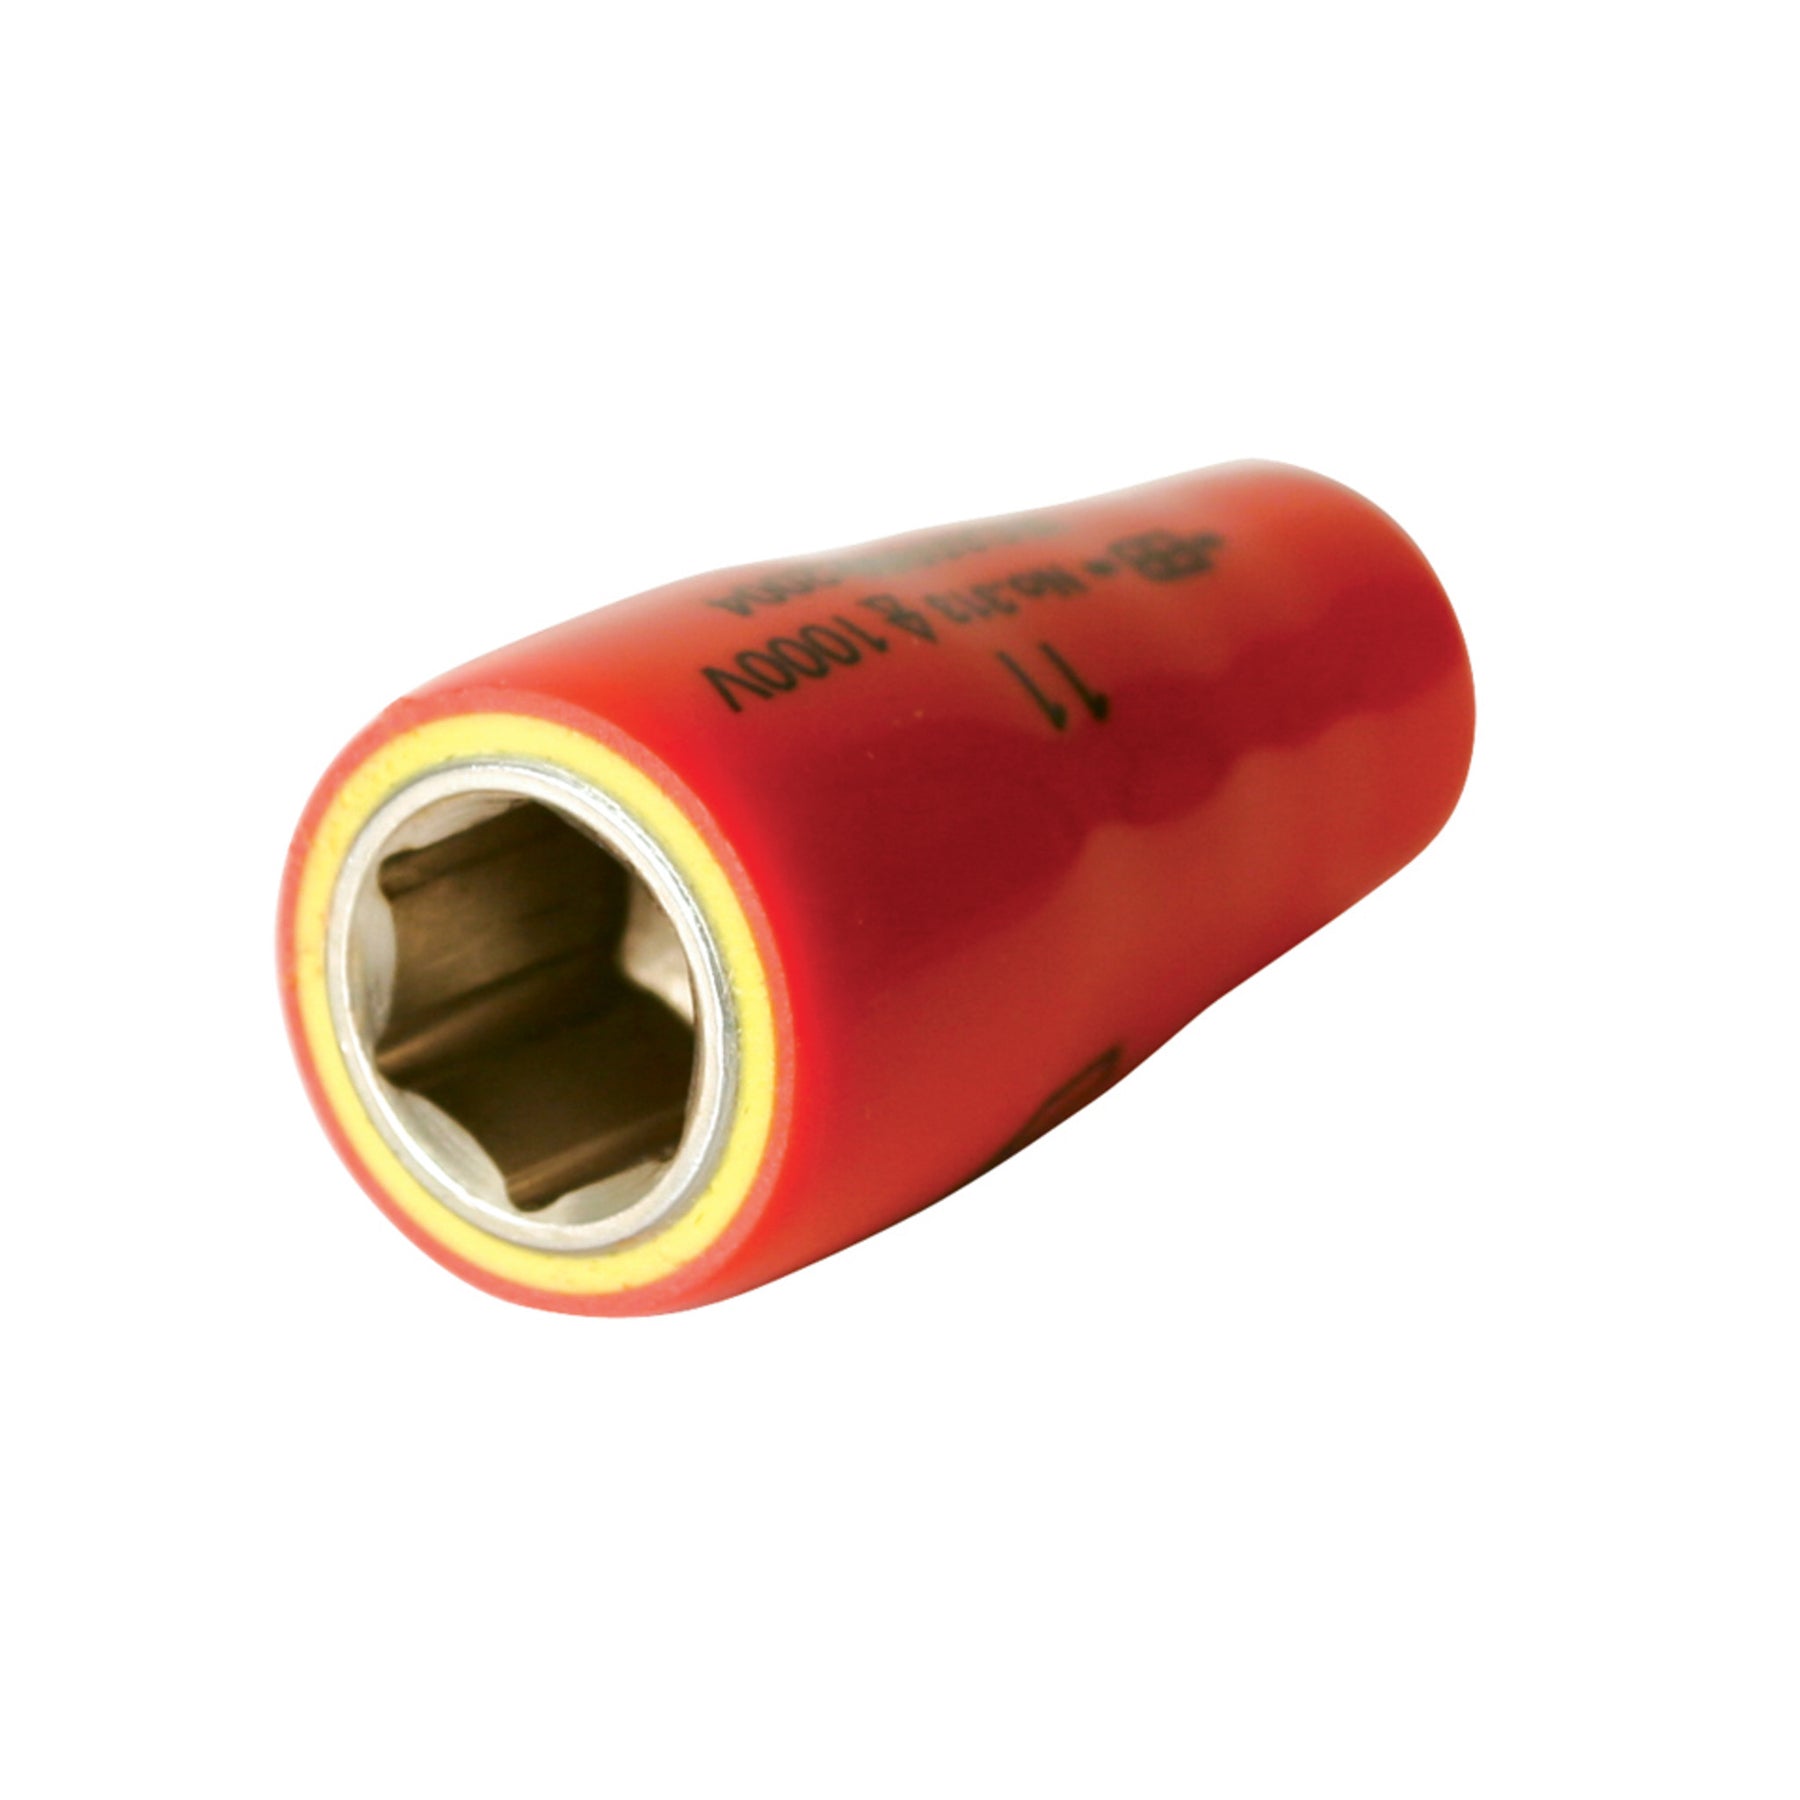 Insulated Socket 1/4" Drive 5mm